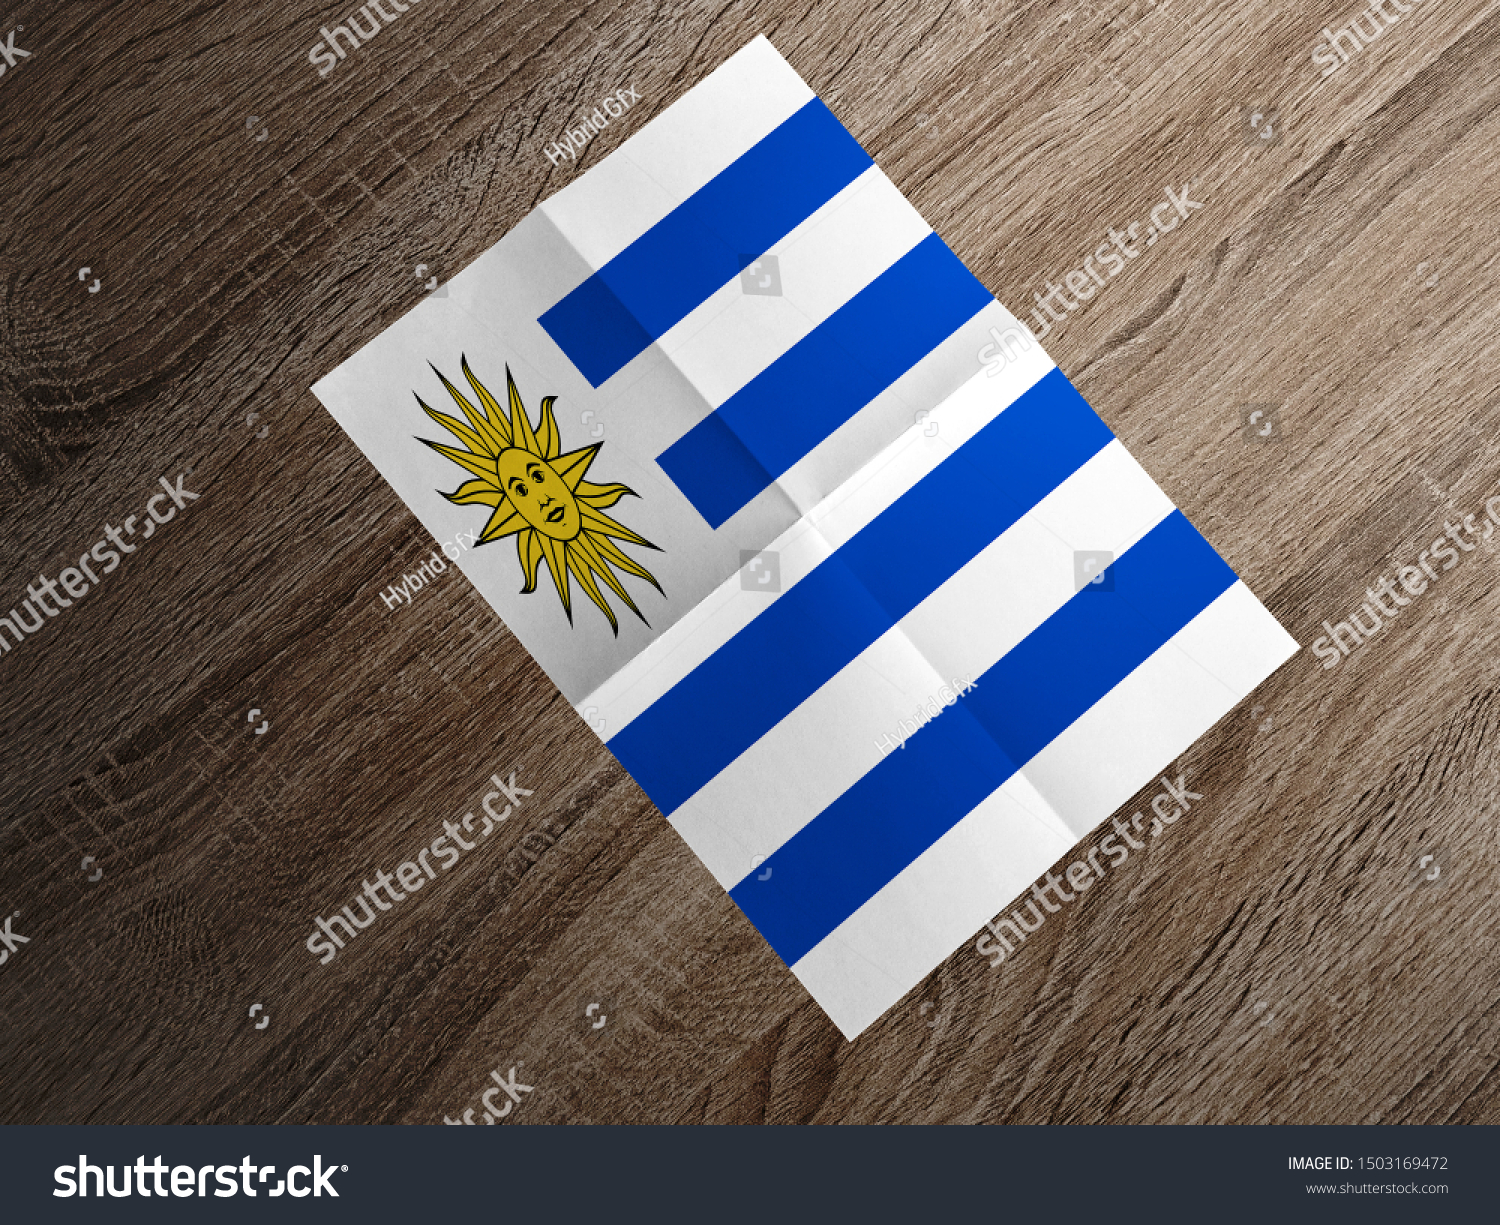 Flag of Uruguay on paper. Uruguay Flag on wooden table. #1503169472